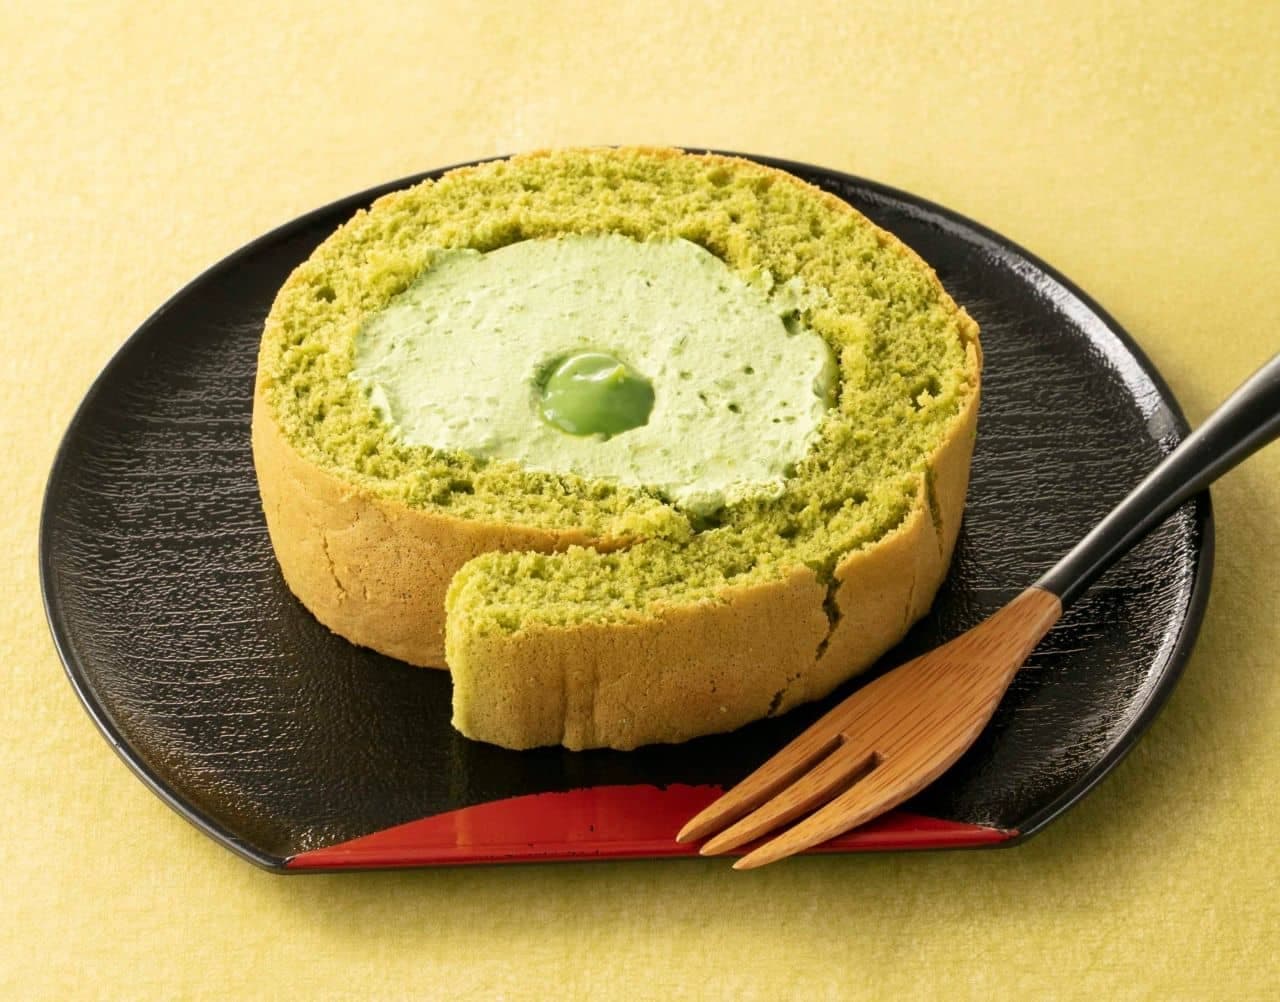 Chateraise "Matcha roll with 50% sugar cut"